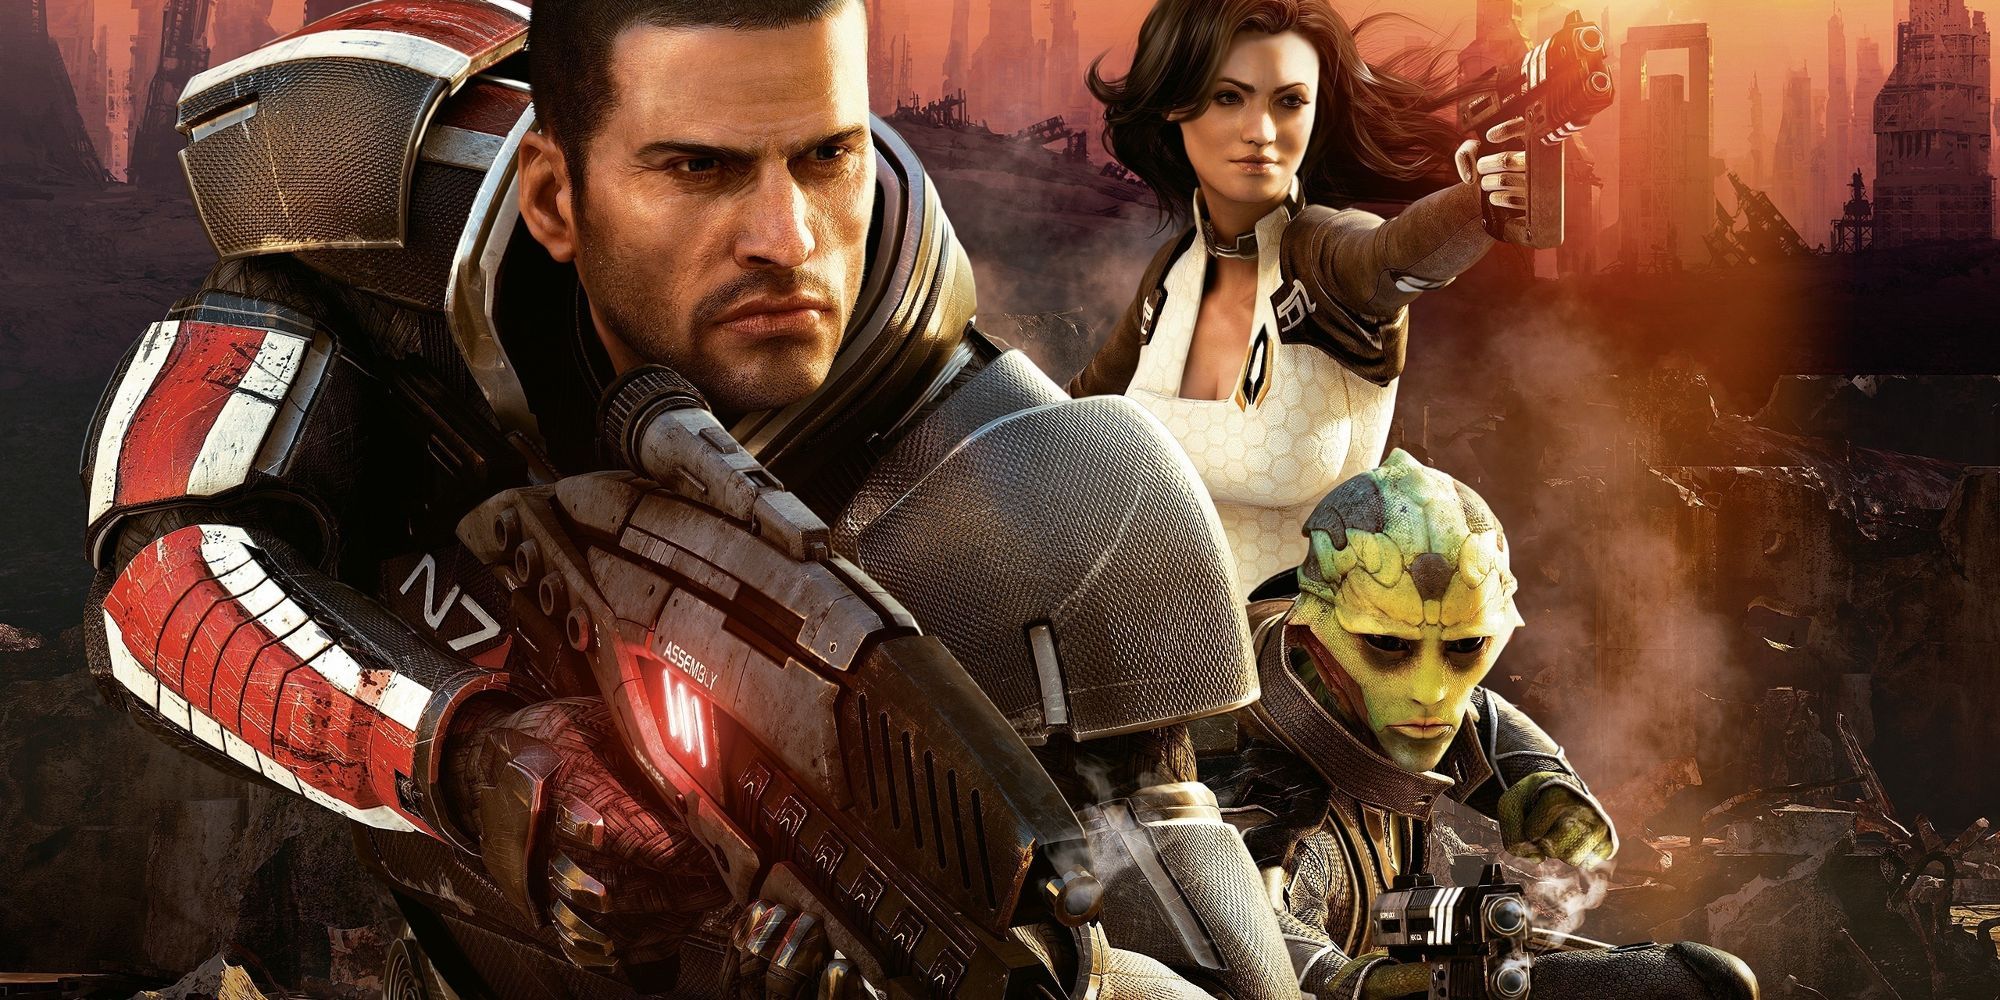 Commander Shepard, Miranda Lawson, and Thane Krios holding firearms in the poster for Mass Effect 2